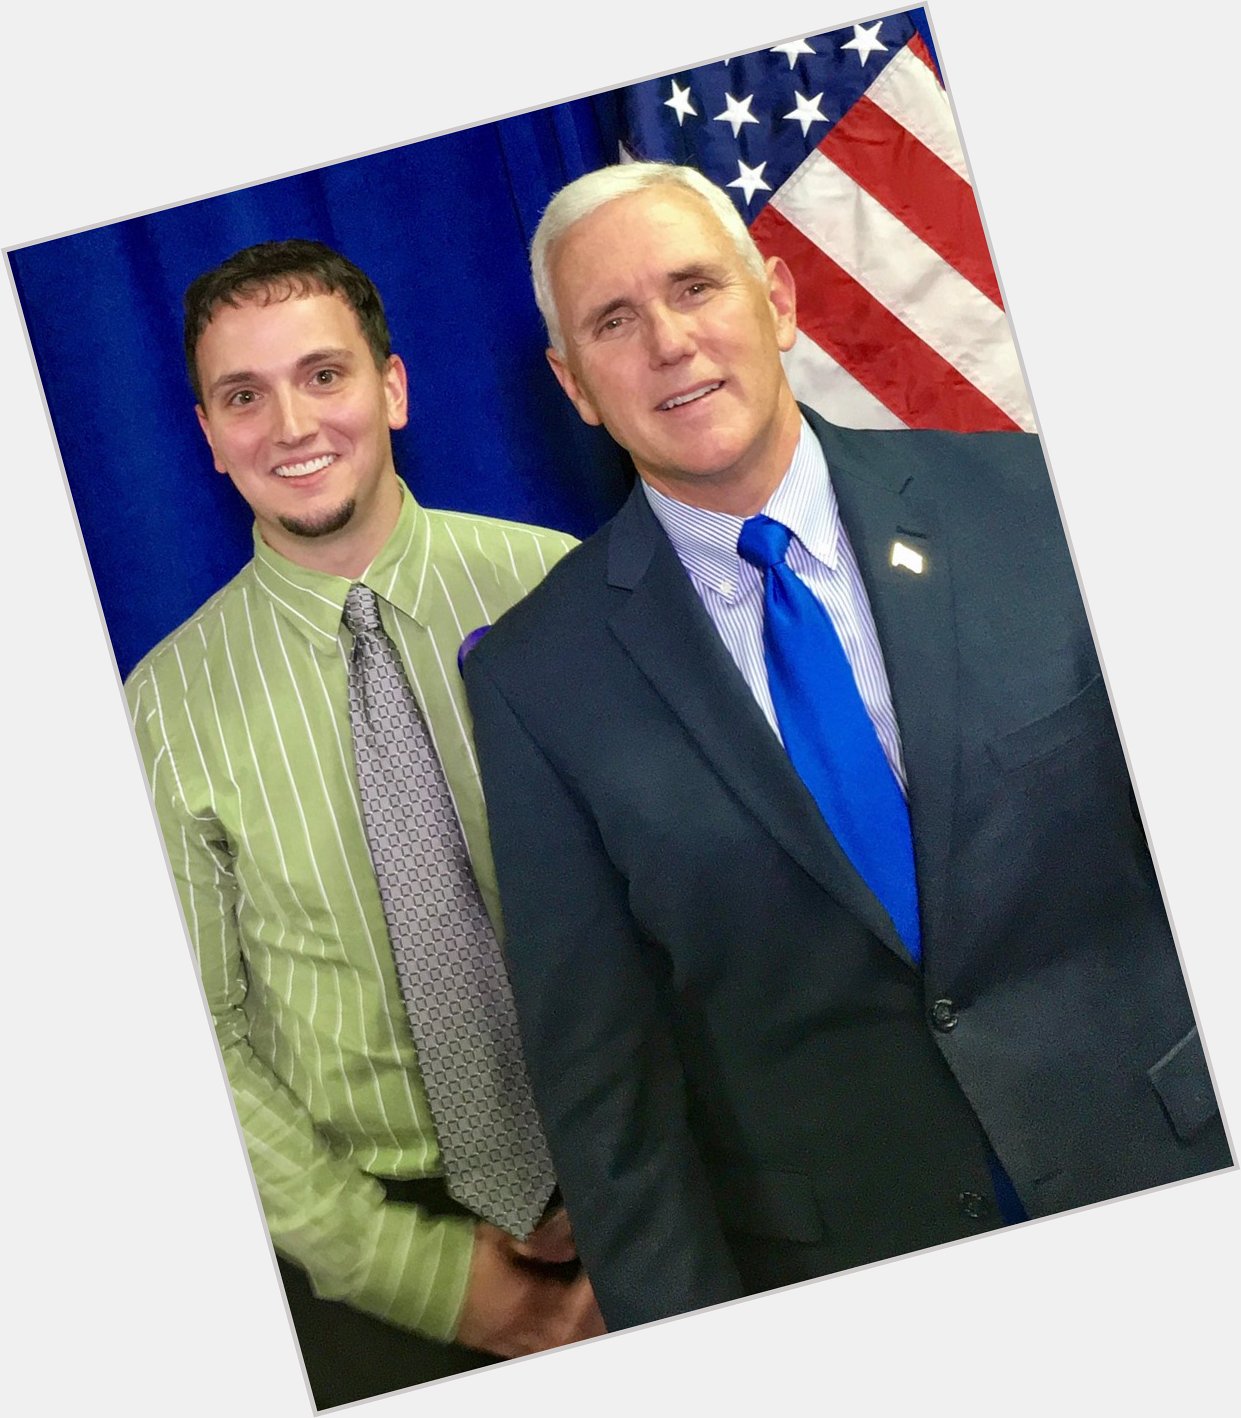 A very happy birthday to Mike Pence. Hope it\s a great one!  